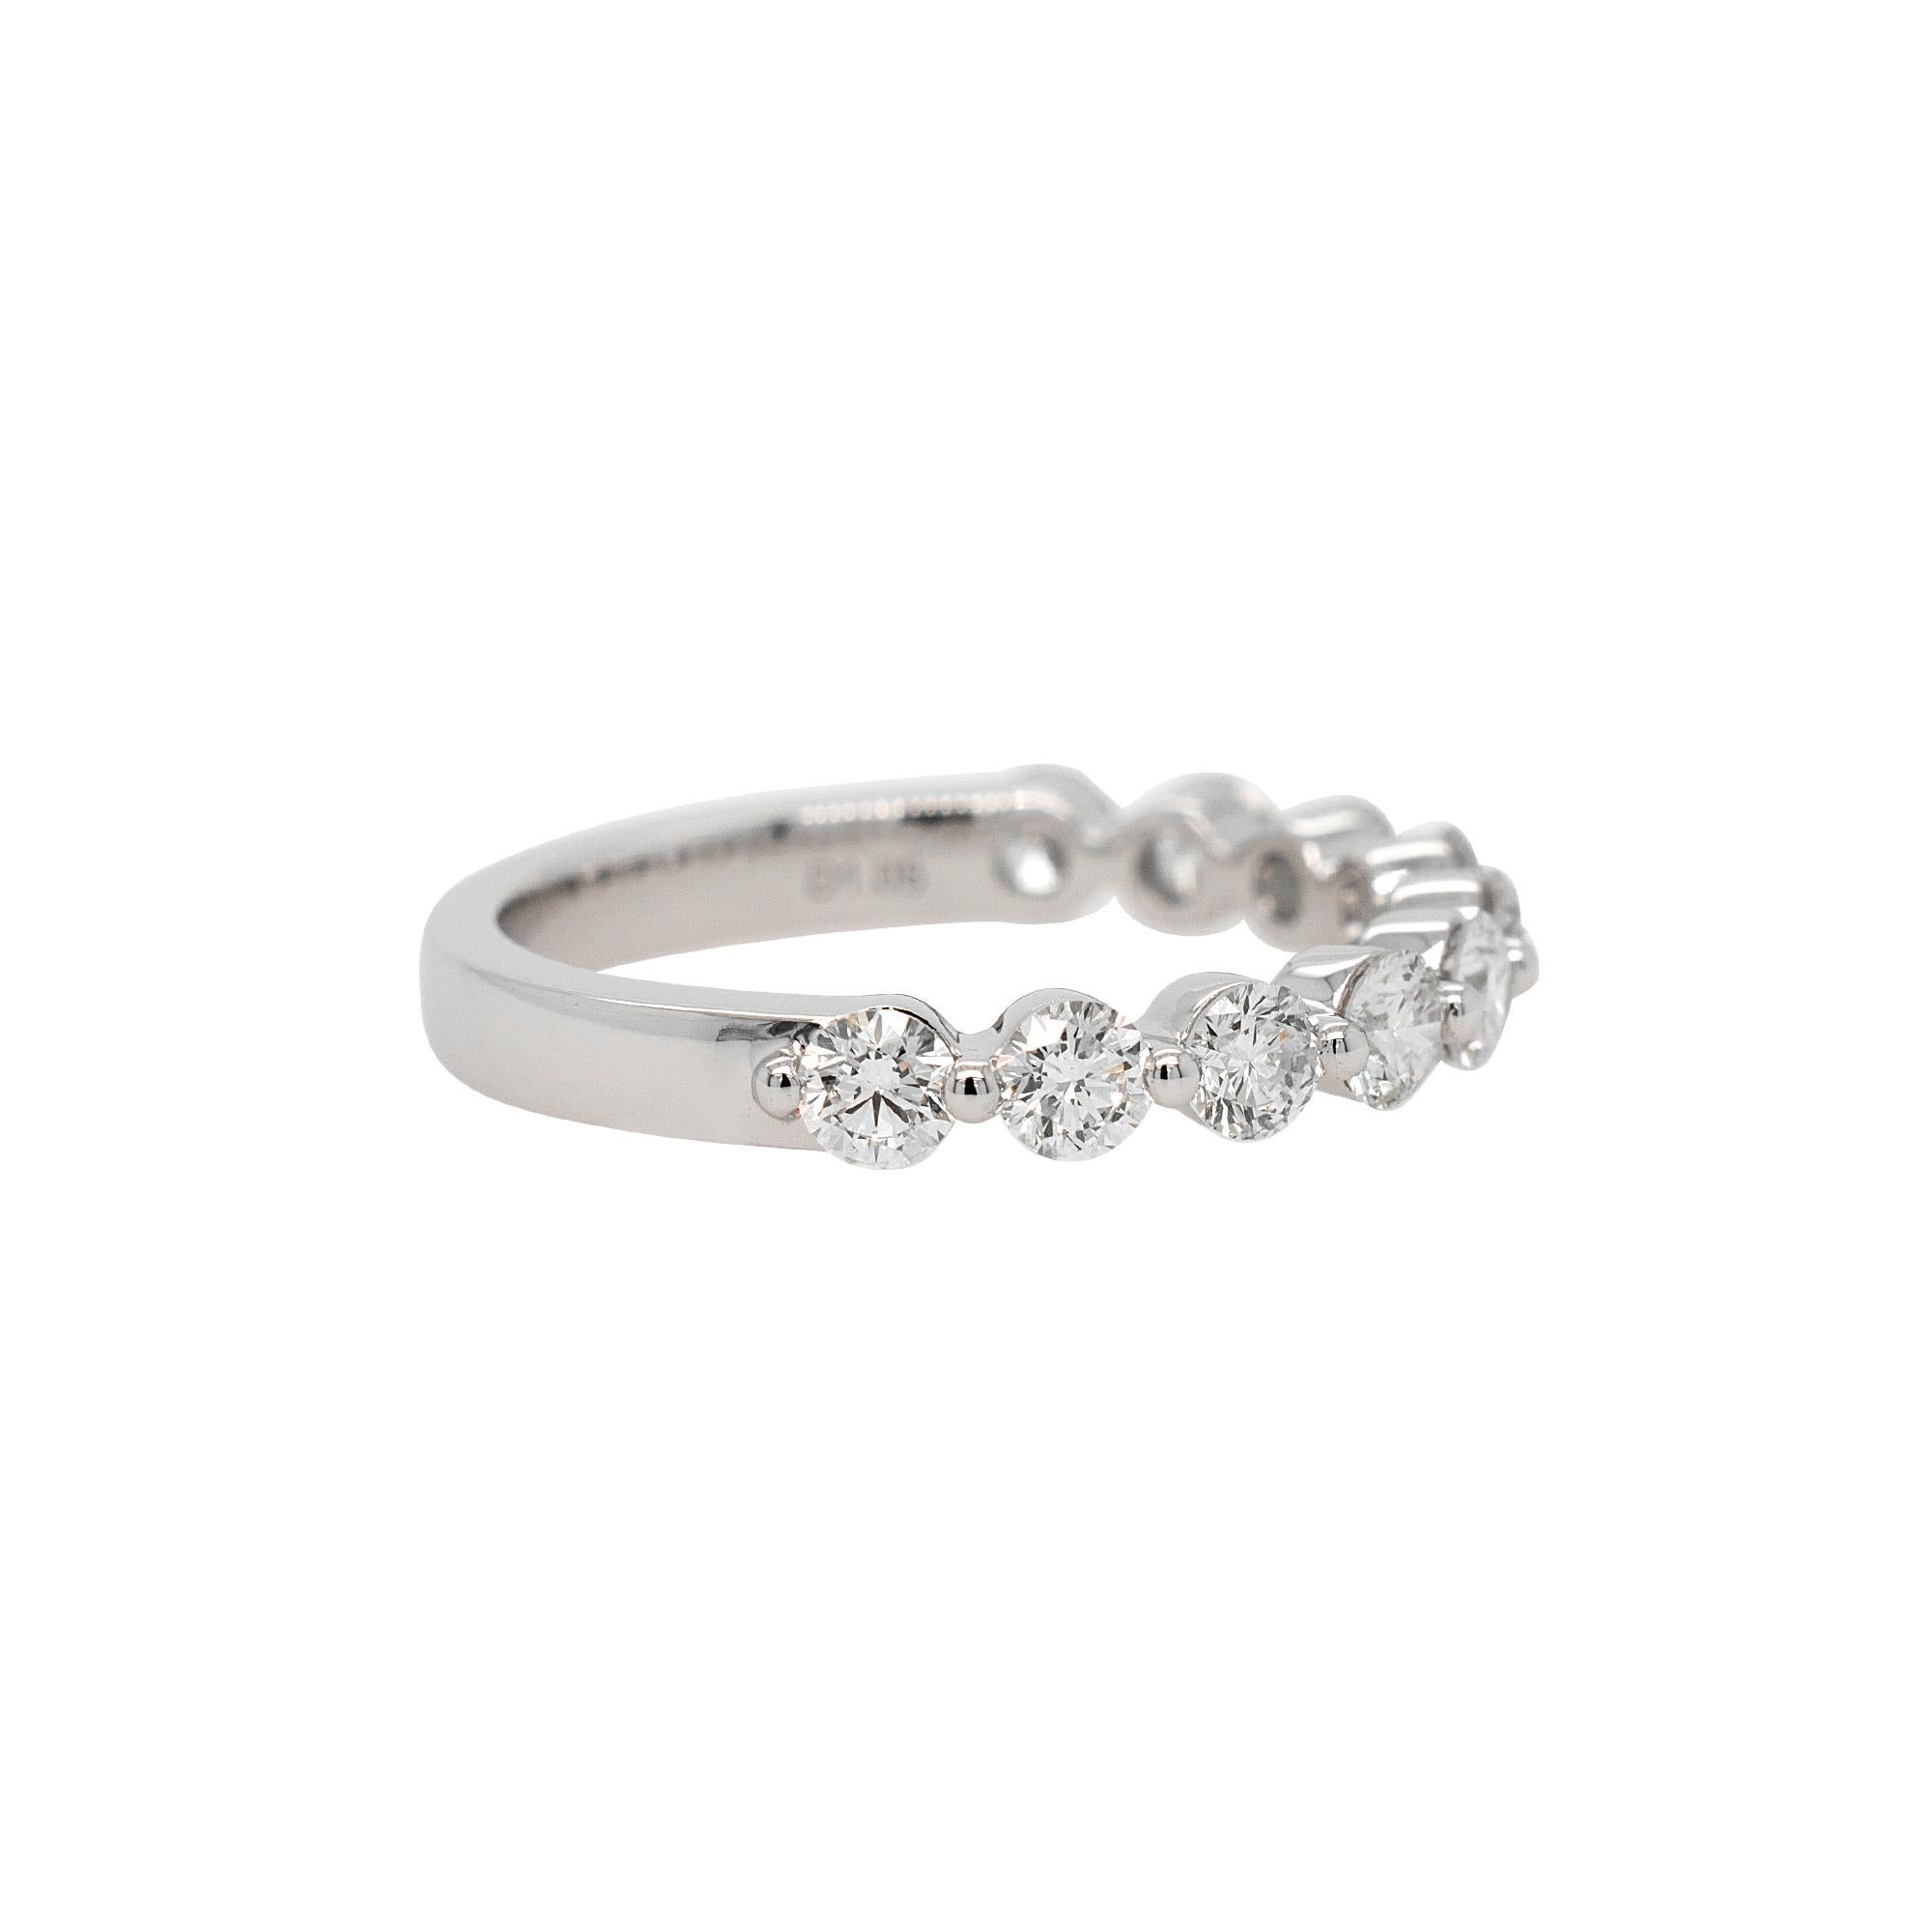 Diamond Details:	
1.05ct Round Brilliant Natural Diamond
G Color VS Clarity
Ring Material: 18k White Gold
Ring Size: 6.25 (can be sized)
Total Weight: 3.4g (2.1dwt)
This item comes with a presentation box!
SKU: A30317337

With its graceful allure